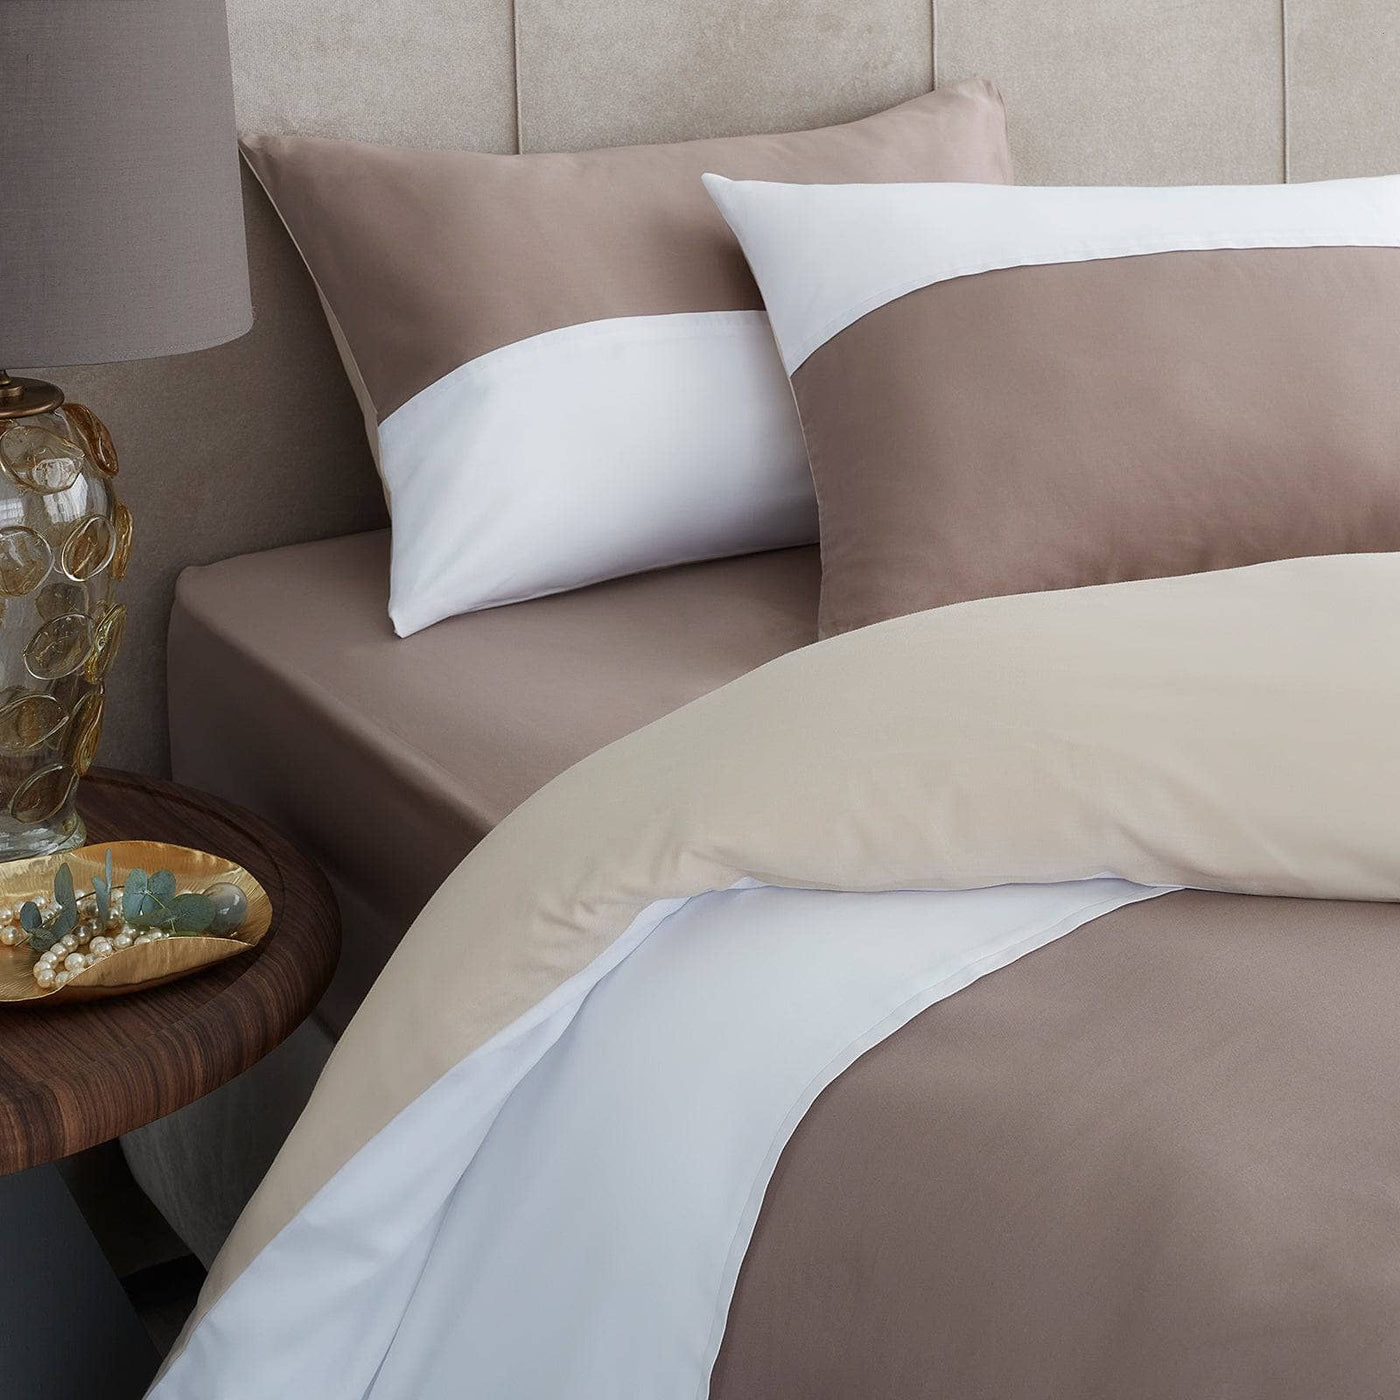 Charles 100% Turkish Cotton Sateen 210 TC Fitted Sheet, Brown, Double Size Bed Sheets sazy.com